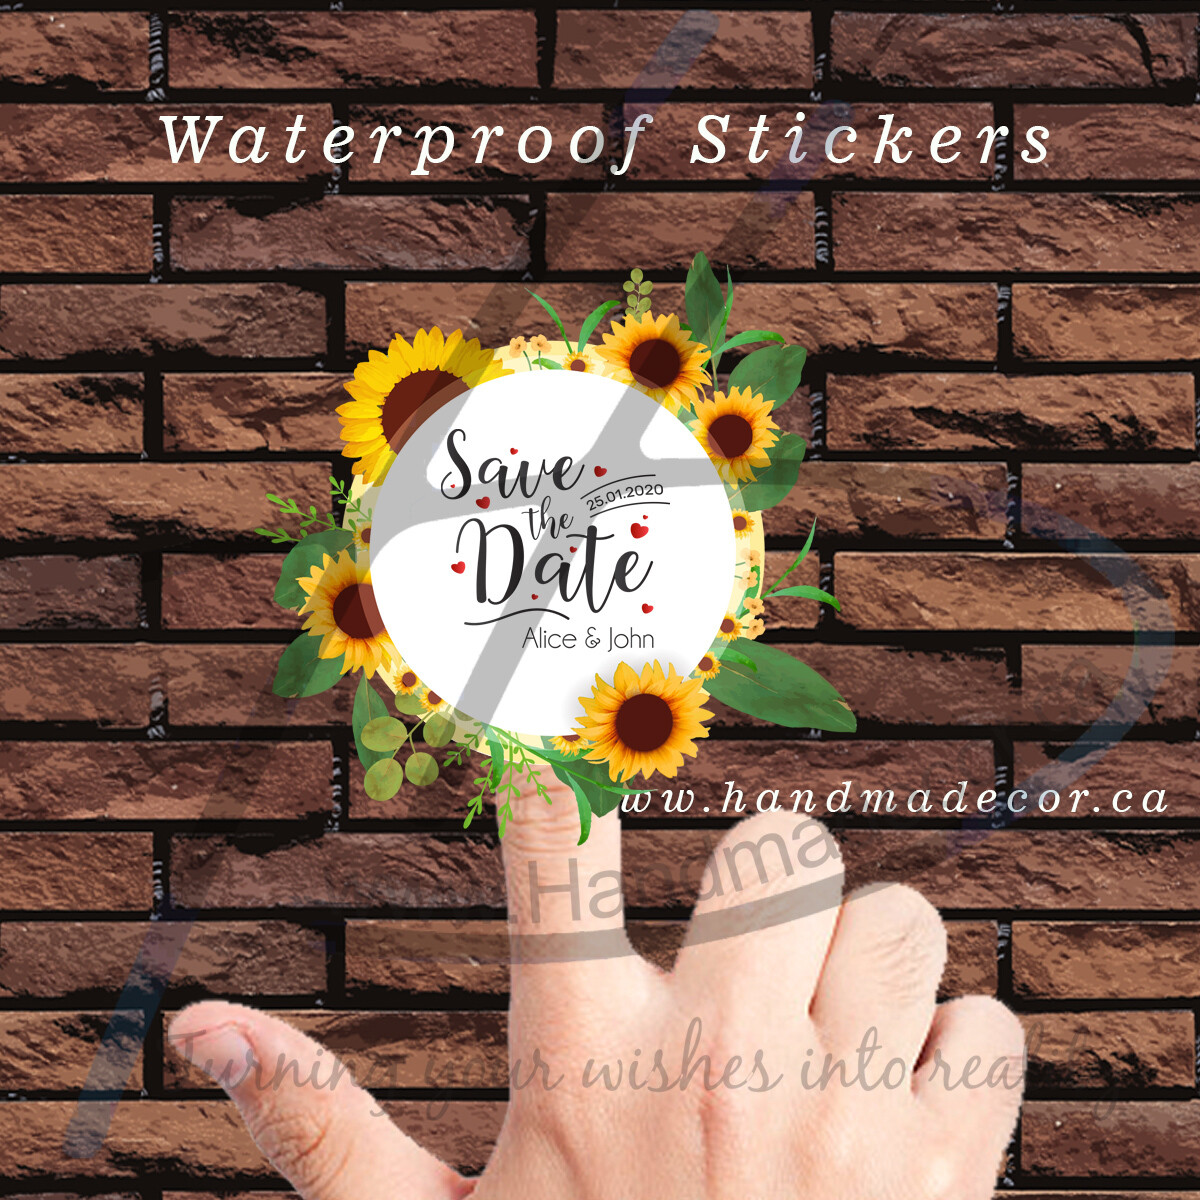 Digital Thank You Stickers, Happy Mail Labels, Packaging Stickers-Circle Vintage Frames With Sunflowers Blossom And Leaves Vector Image